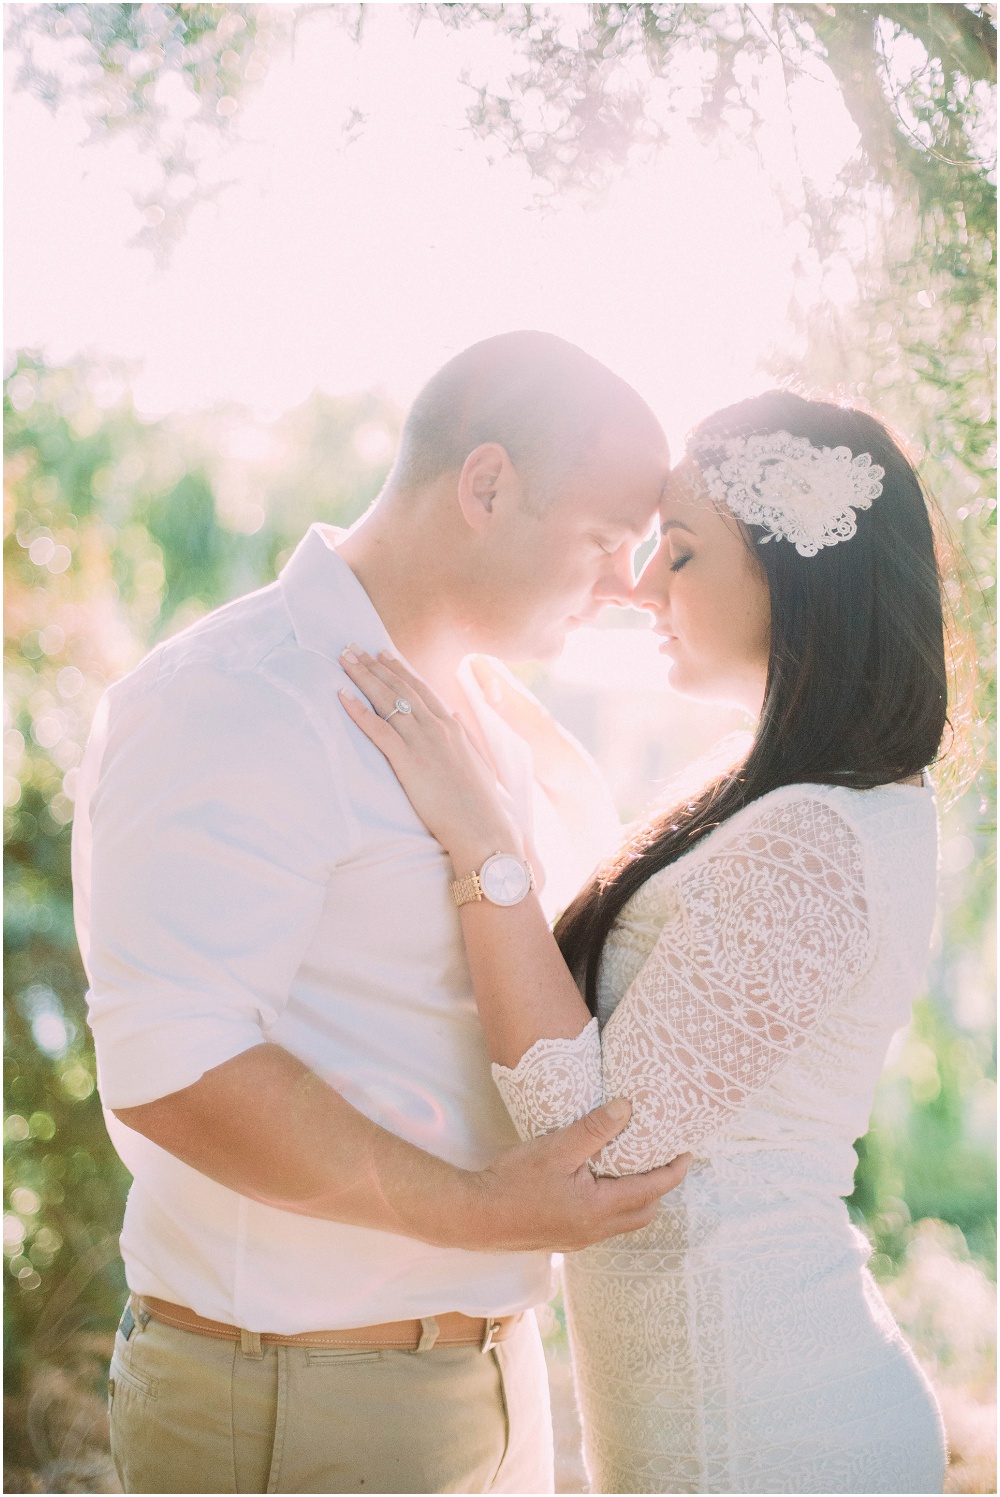 Ronel Kruger Cape Town Wedding and Lifestyle Photographer_3883.jpg